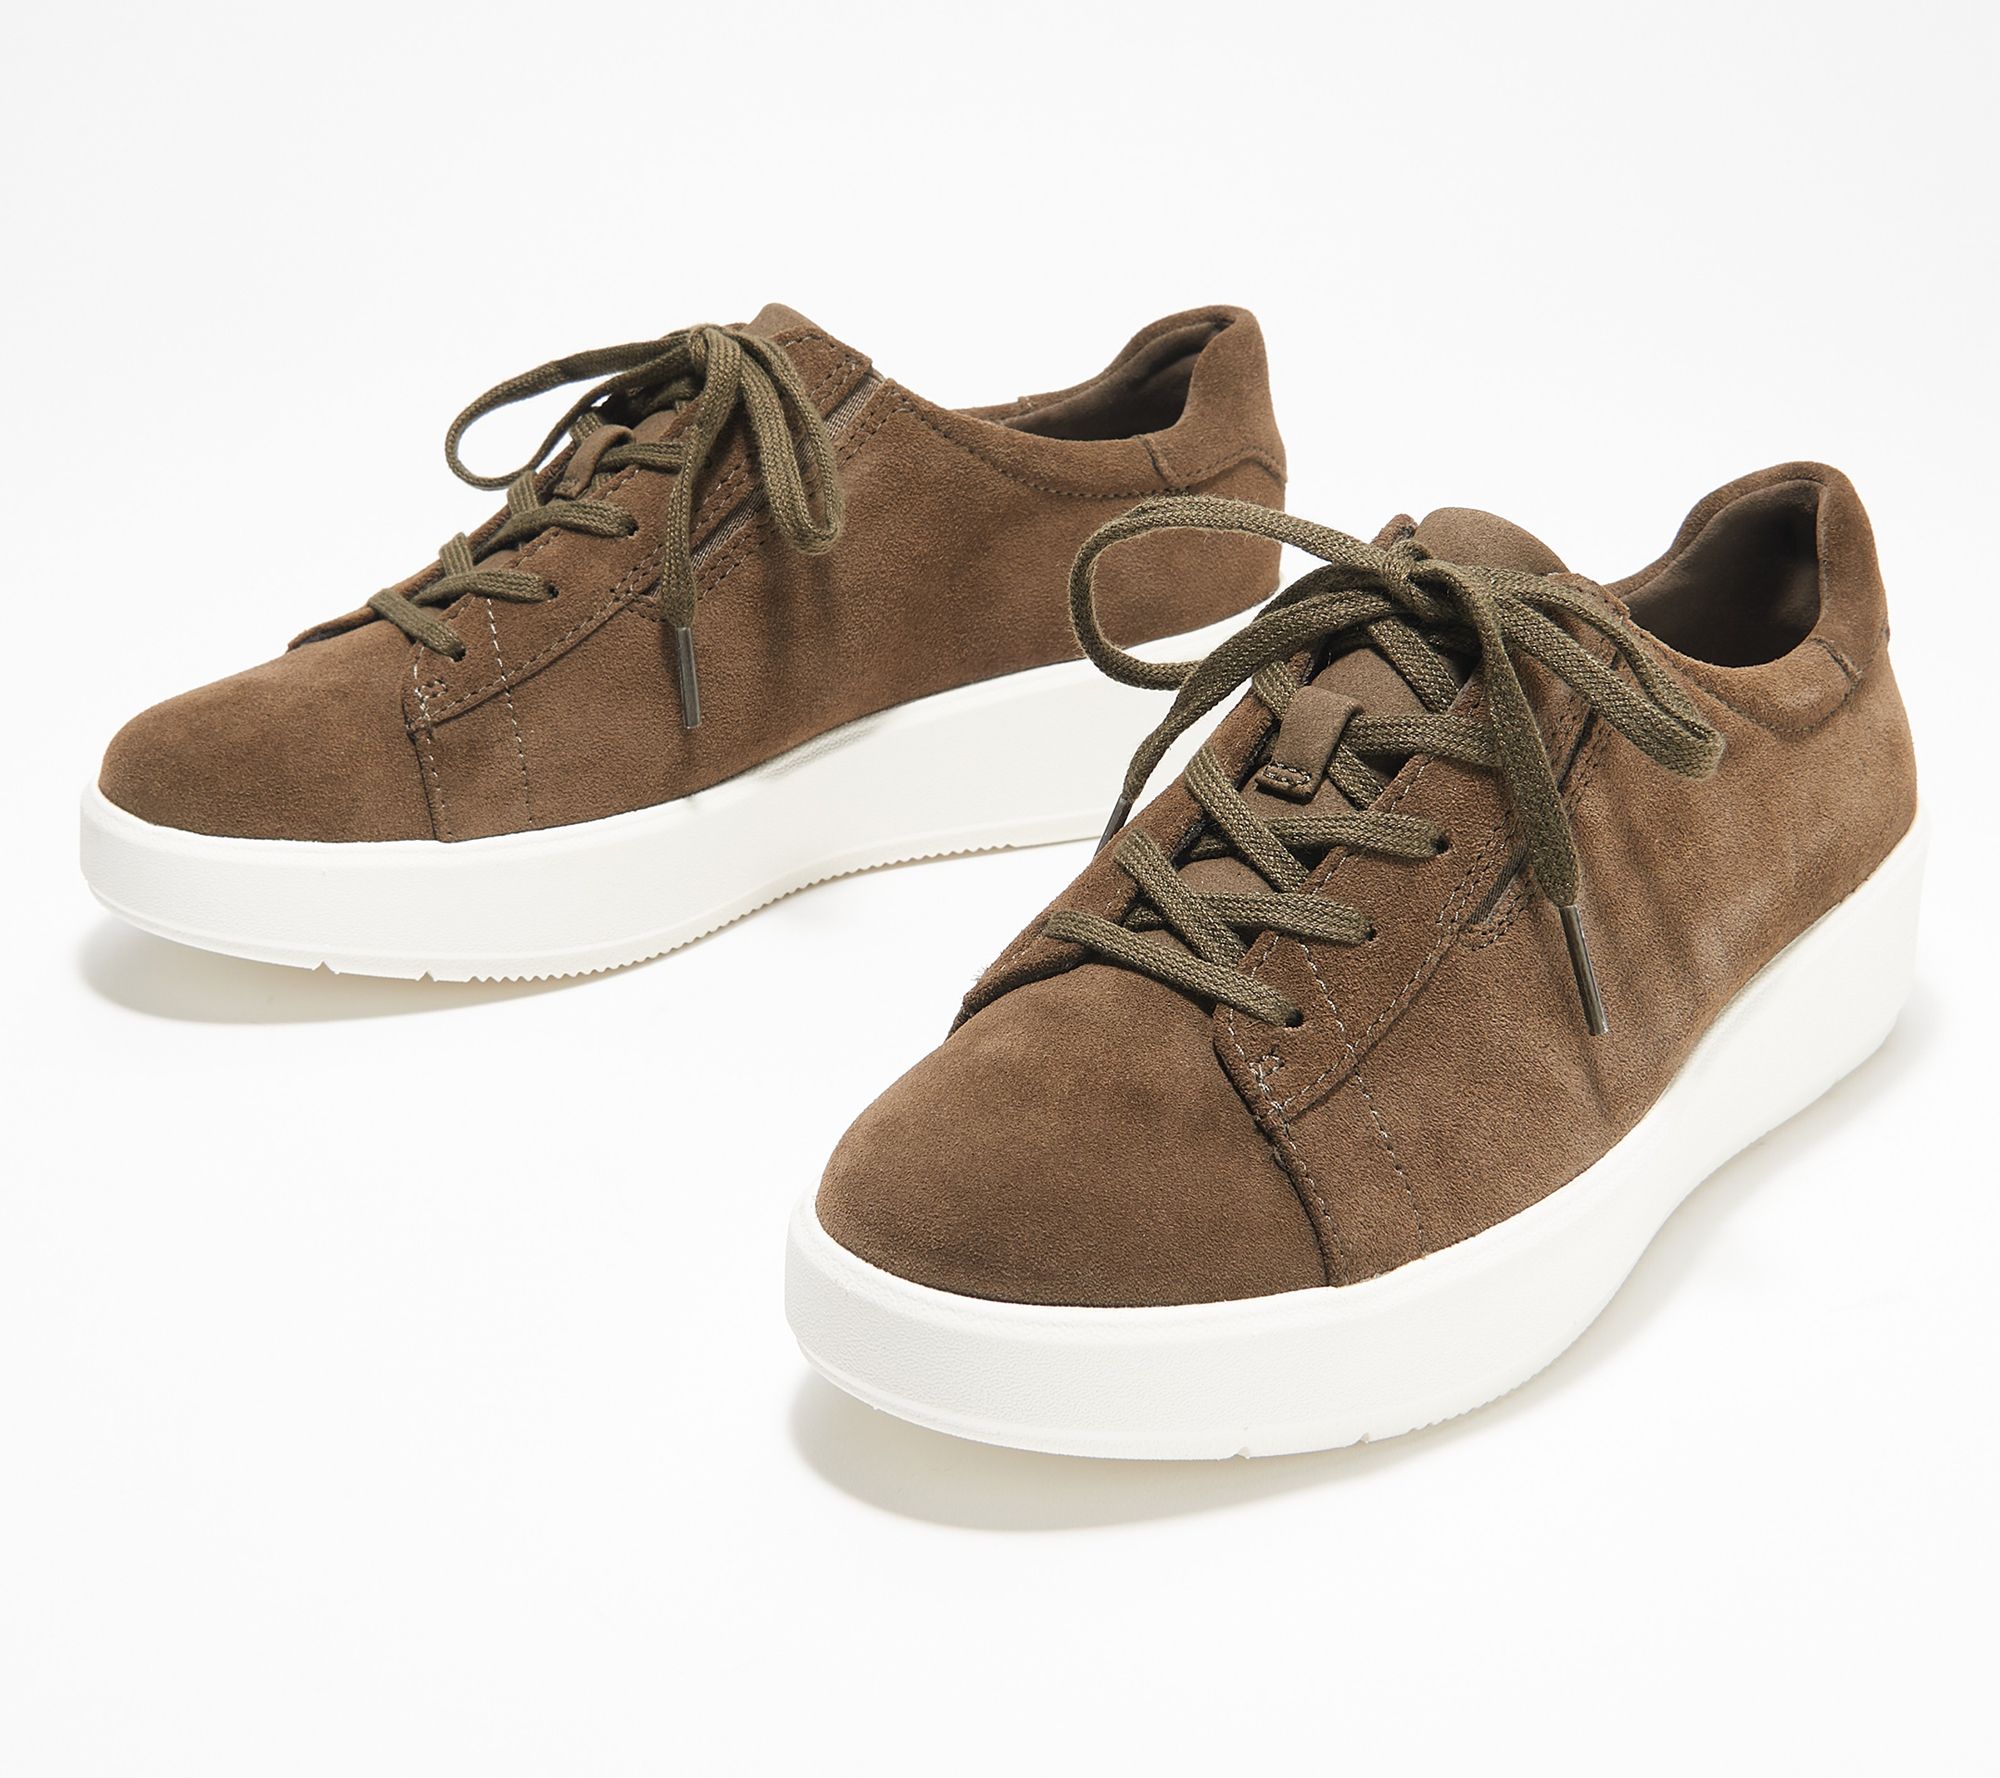 Clarks Collection Leather Casual Sneakers - Layton - QVC.com